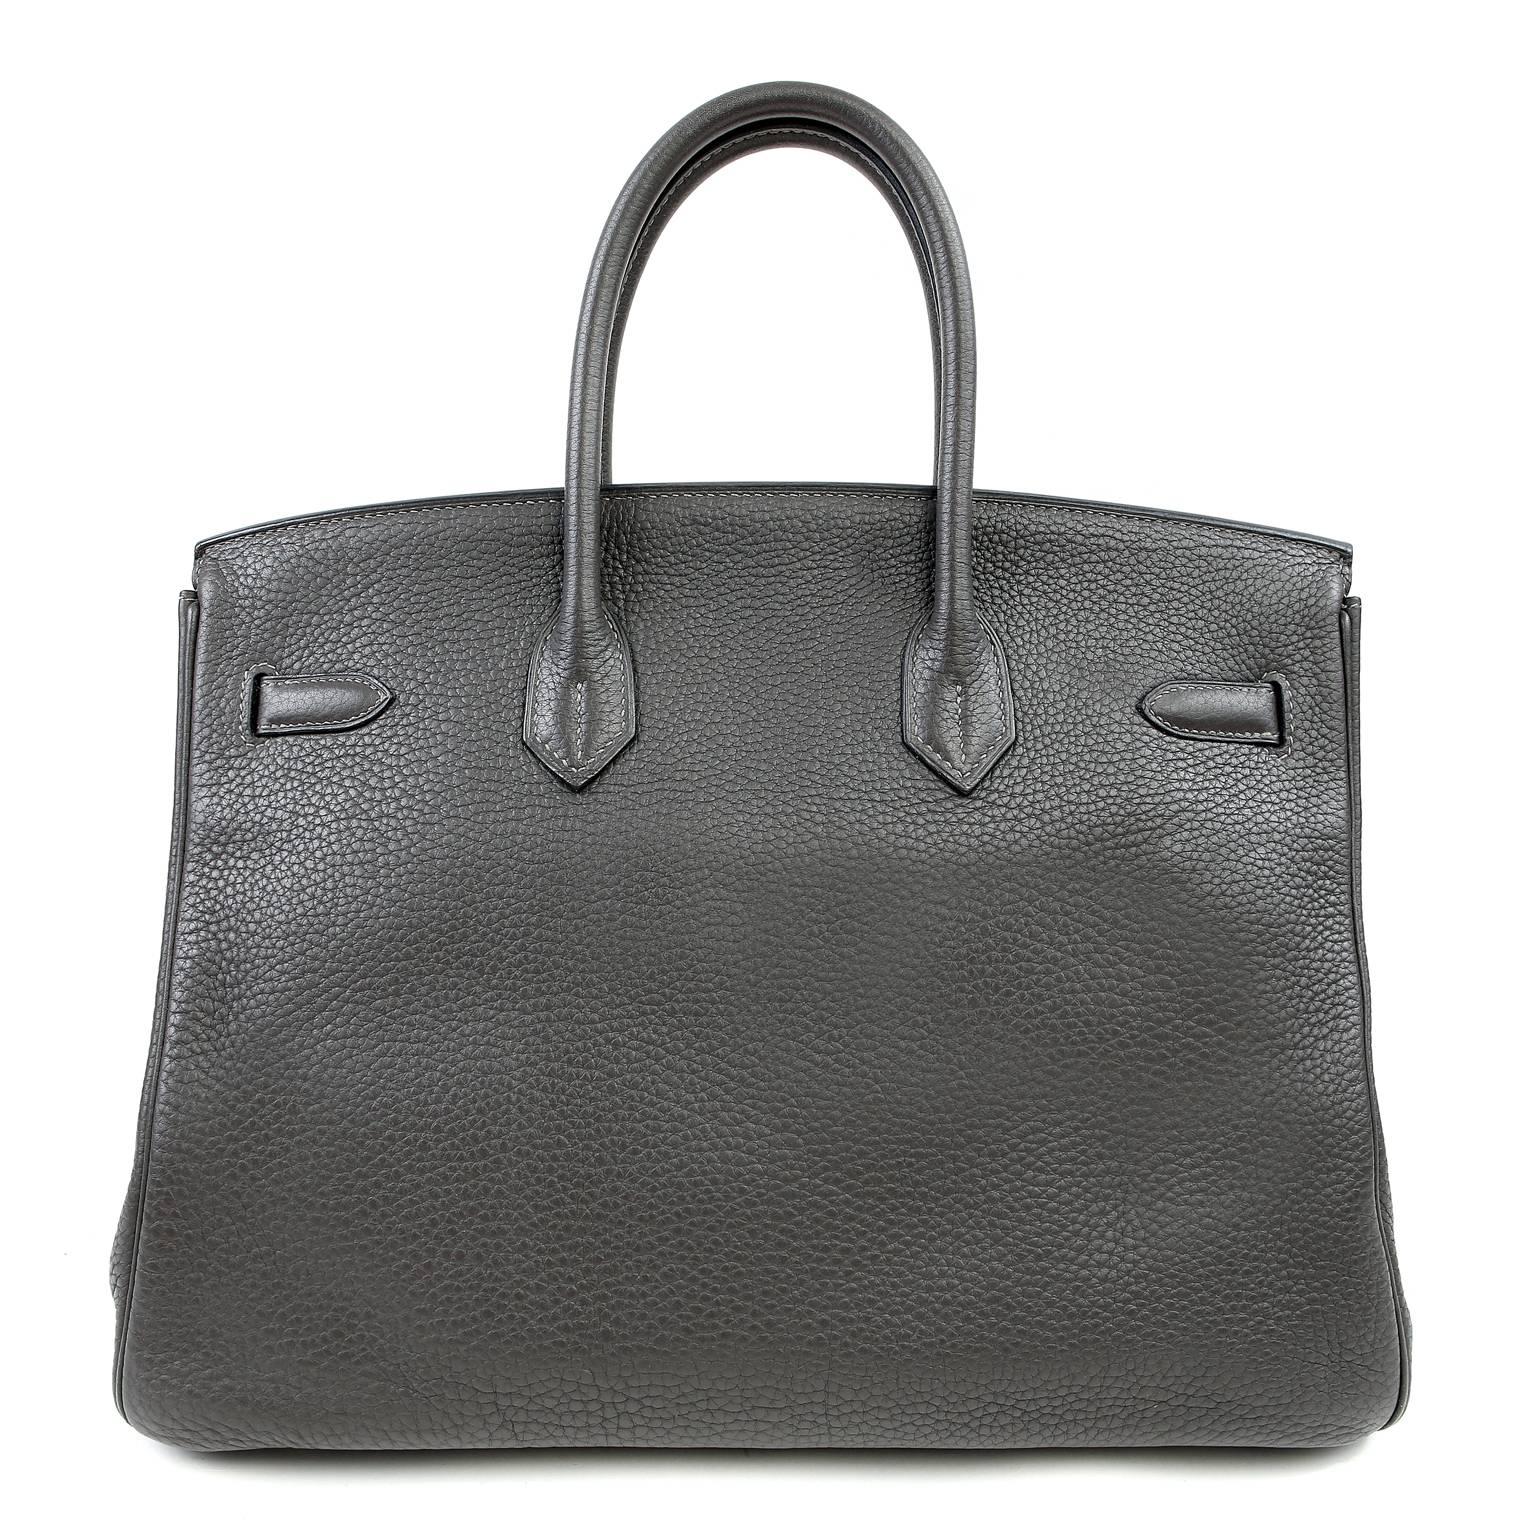 Hermès Graphite 35 cm Clemence  Birkin Bag- PRISTINE
Appears never carried and has the protective plastic intact on the hardware.   Crafted entirely by hand with extensive waistlists, the Birkin is coveted worldwide.
 
  Clemence is made from